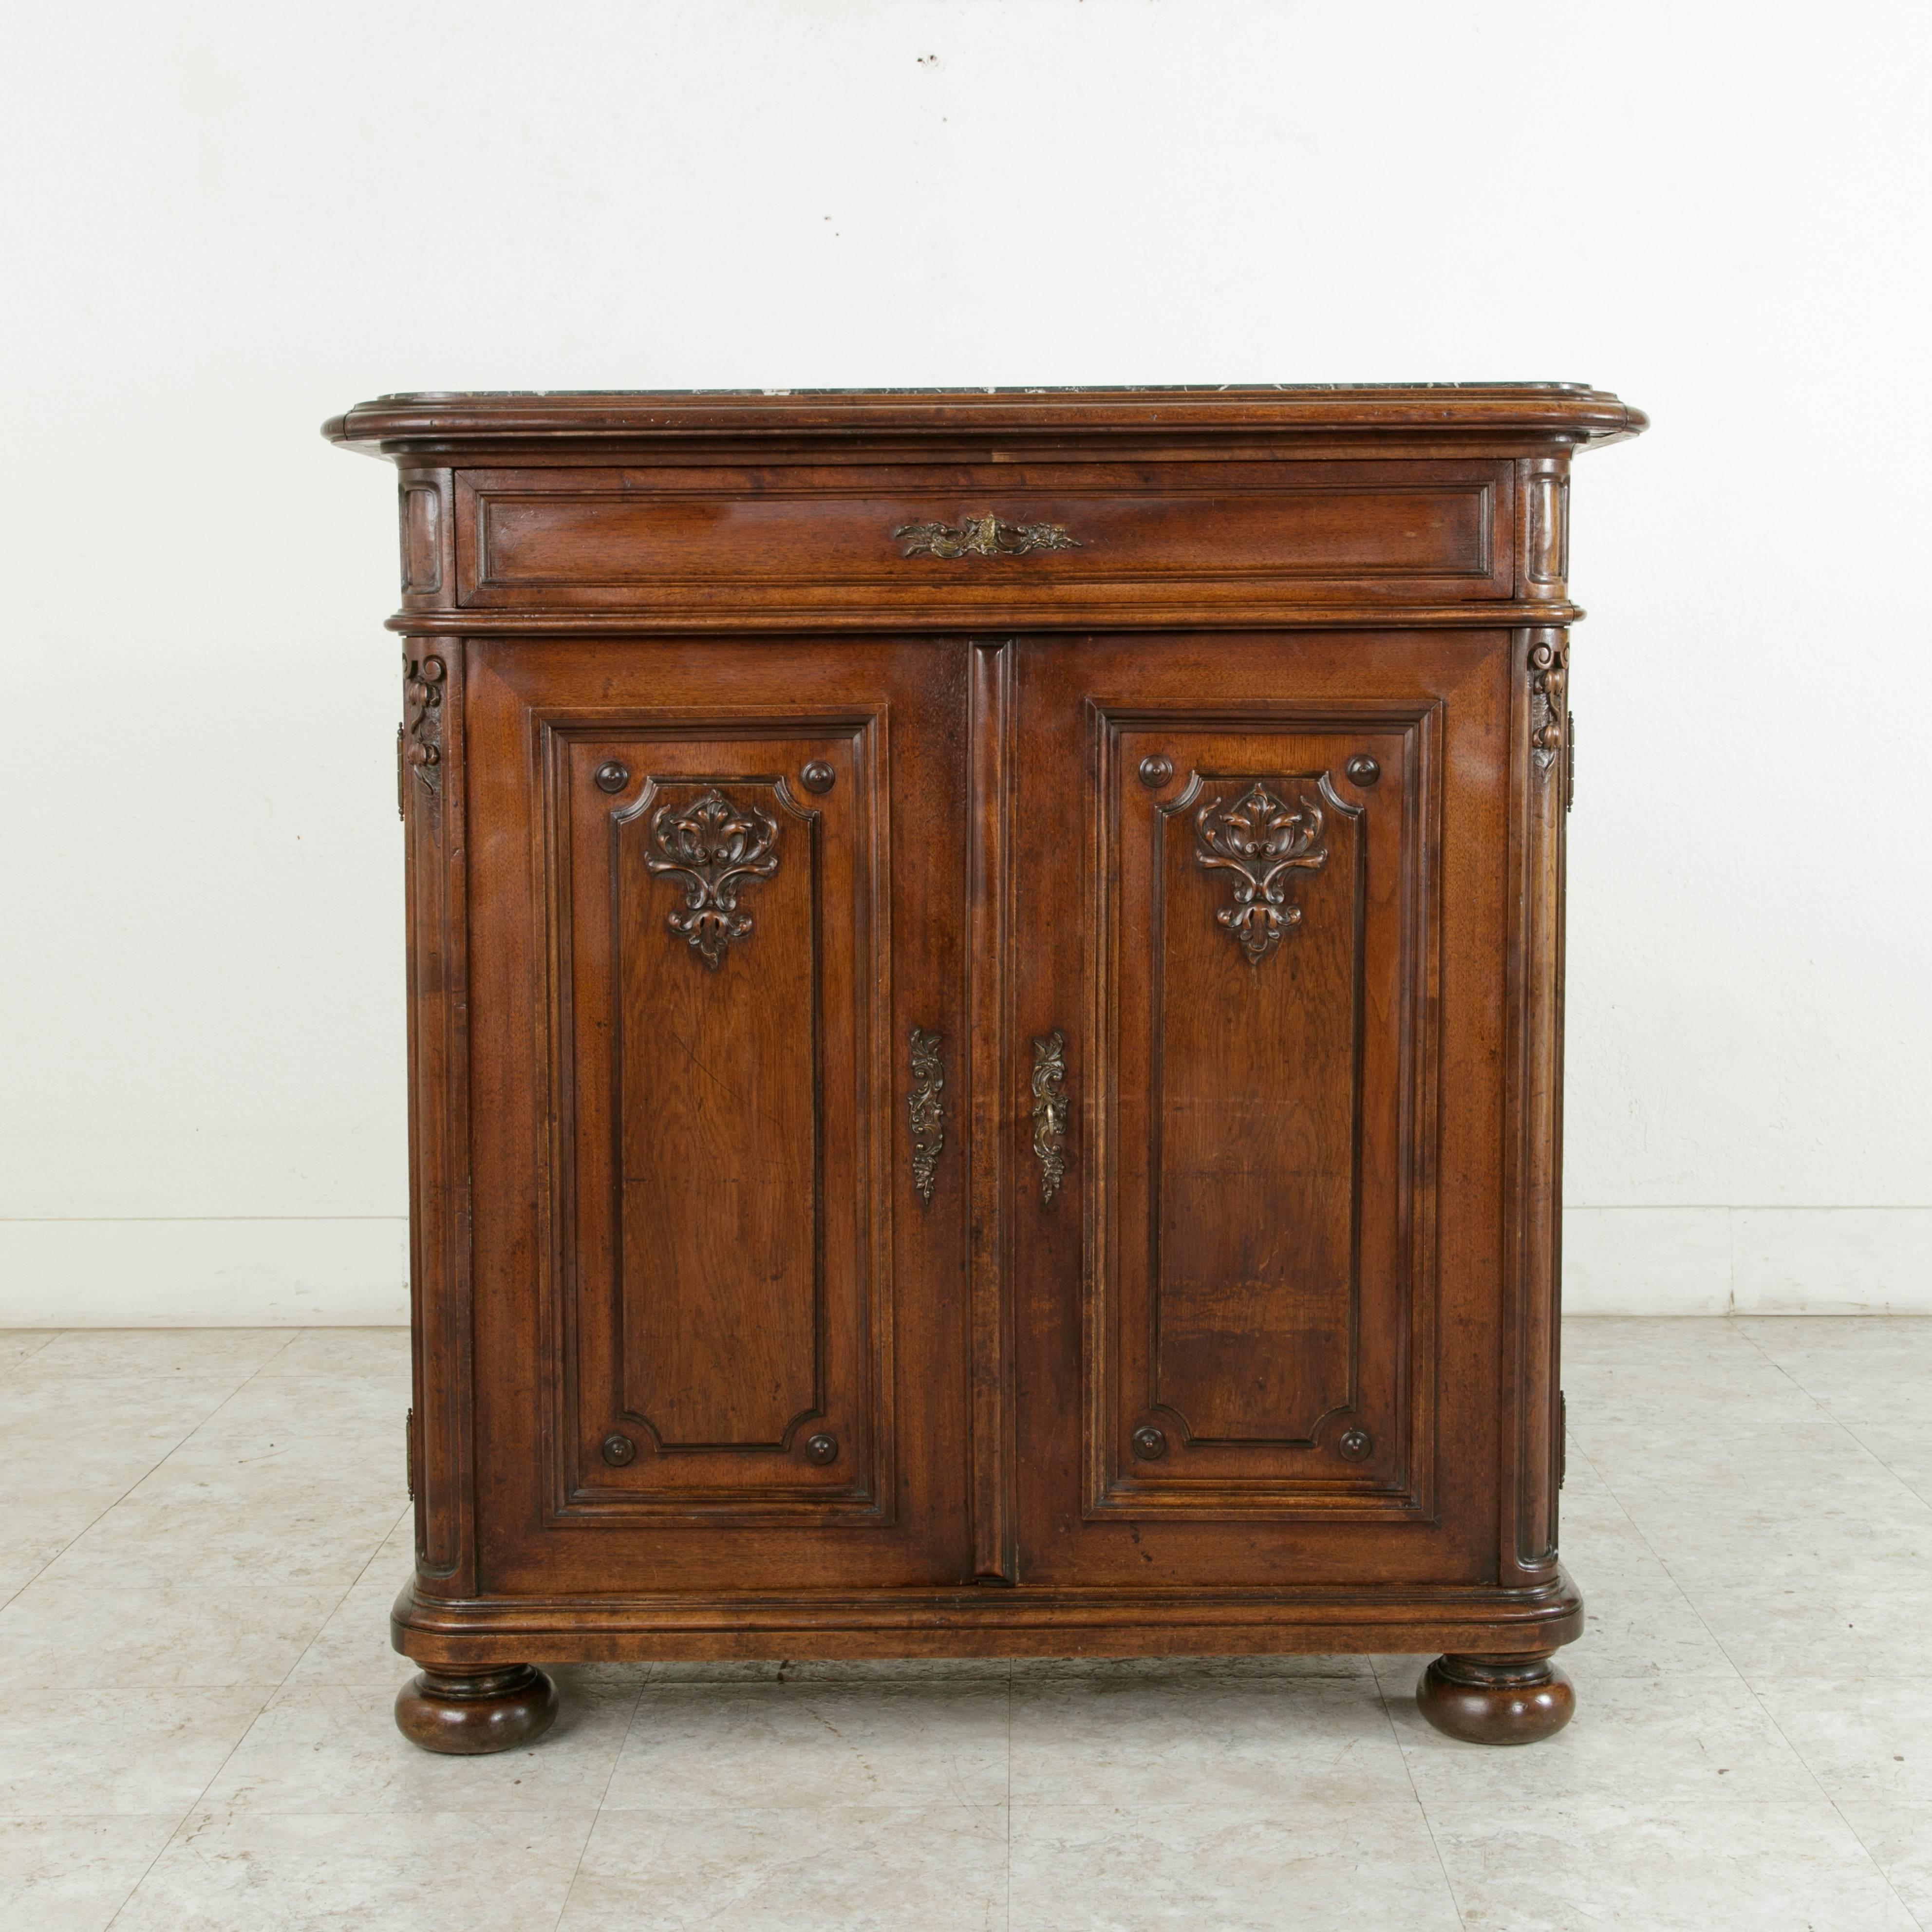 This late 19th century hand-carved walnut buffet or cabinet from Liege, Belgium, rests on bun feet and features a Saint Anne marble top inset into a beveled wooden frame. The paneled sides are constructed of solid oak. The two doors are hinged at